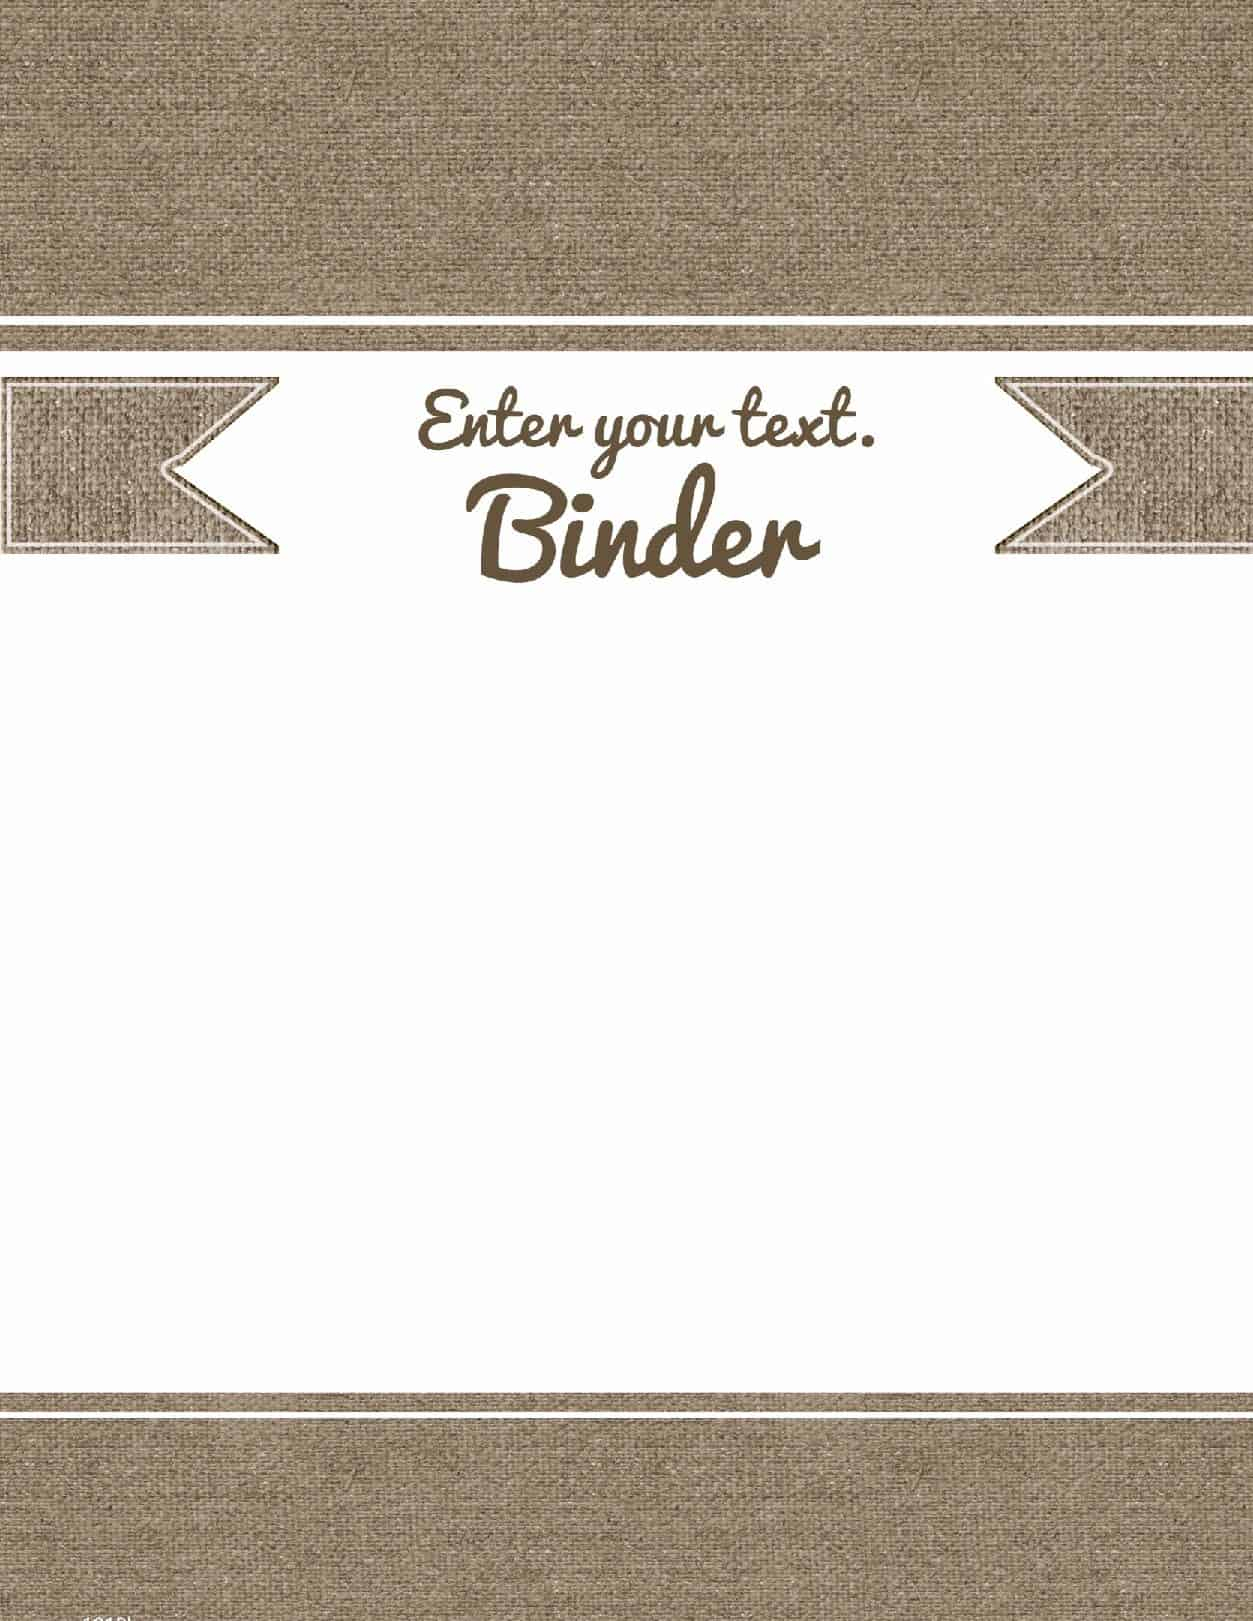 Free Binder Cover Templates | Customize Online &amp;amp; Print At Home | Free! - Free Printable Binder Covers